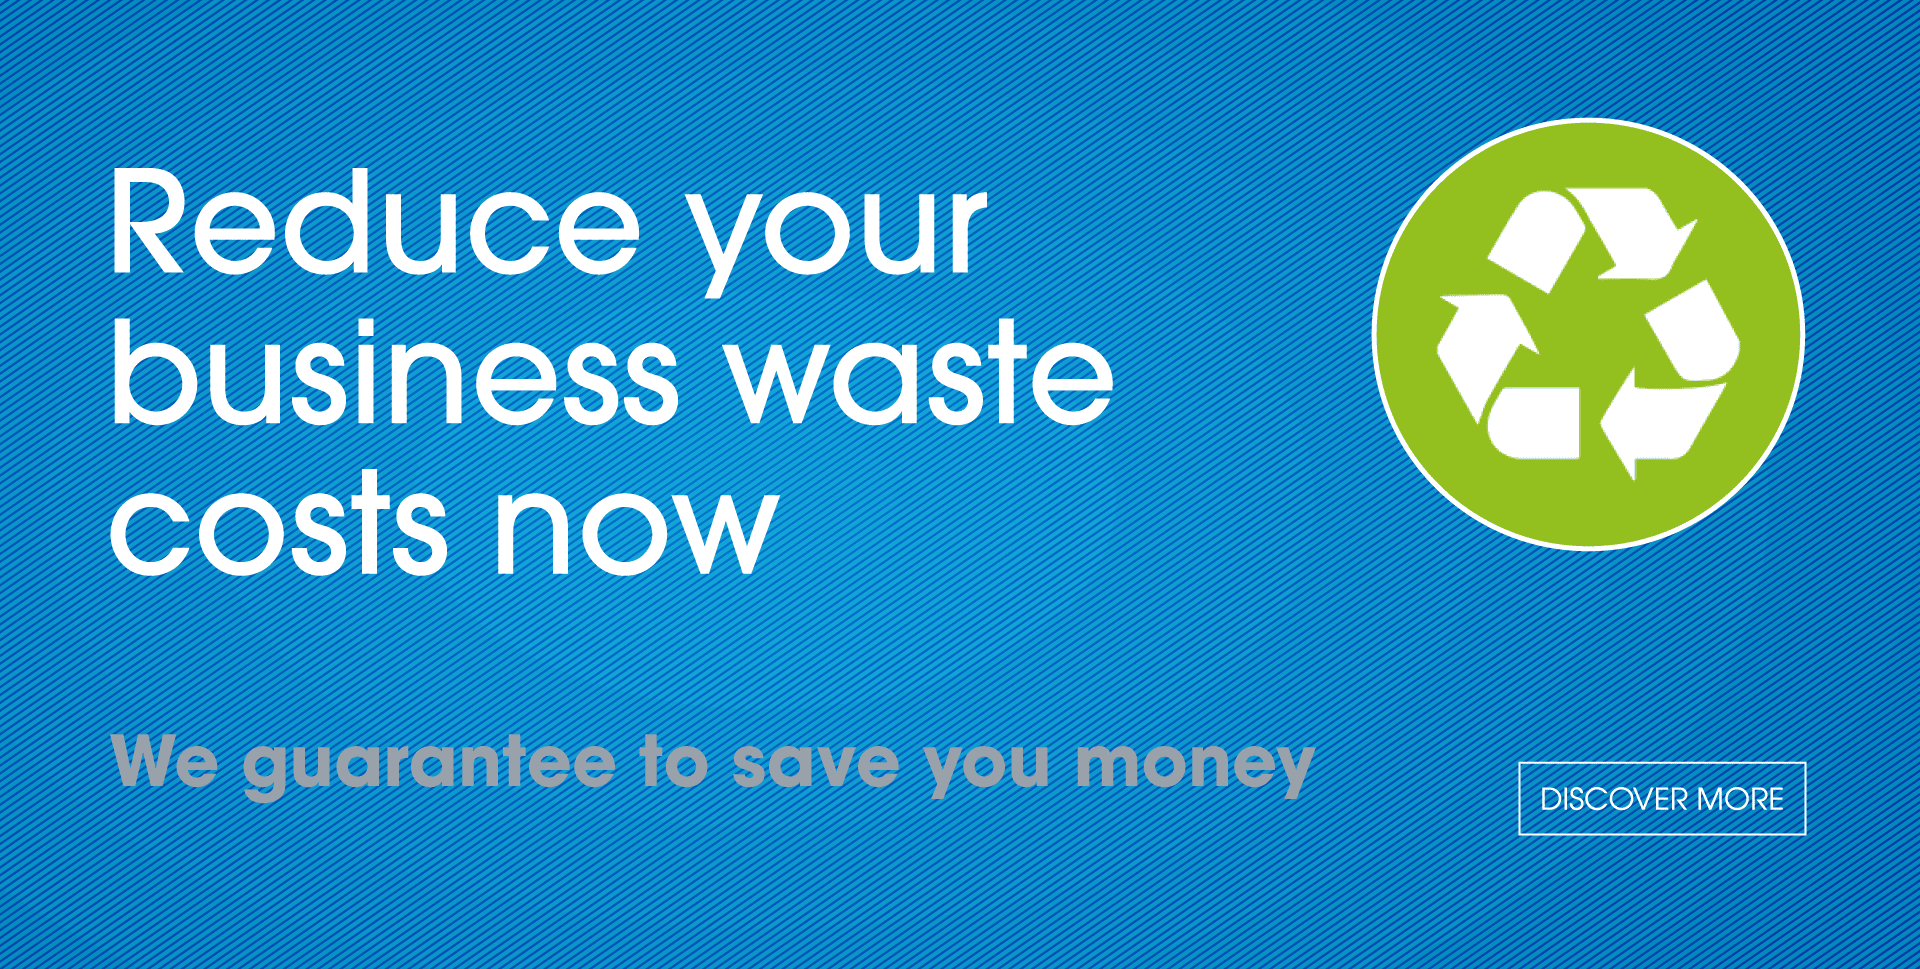 Reduce your business waste costs now